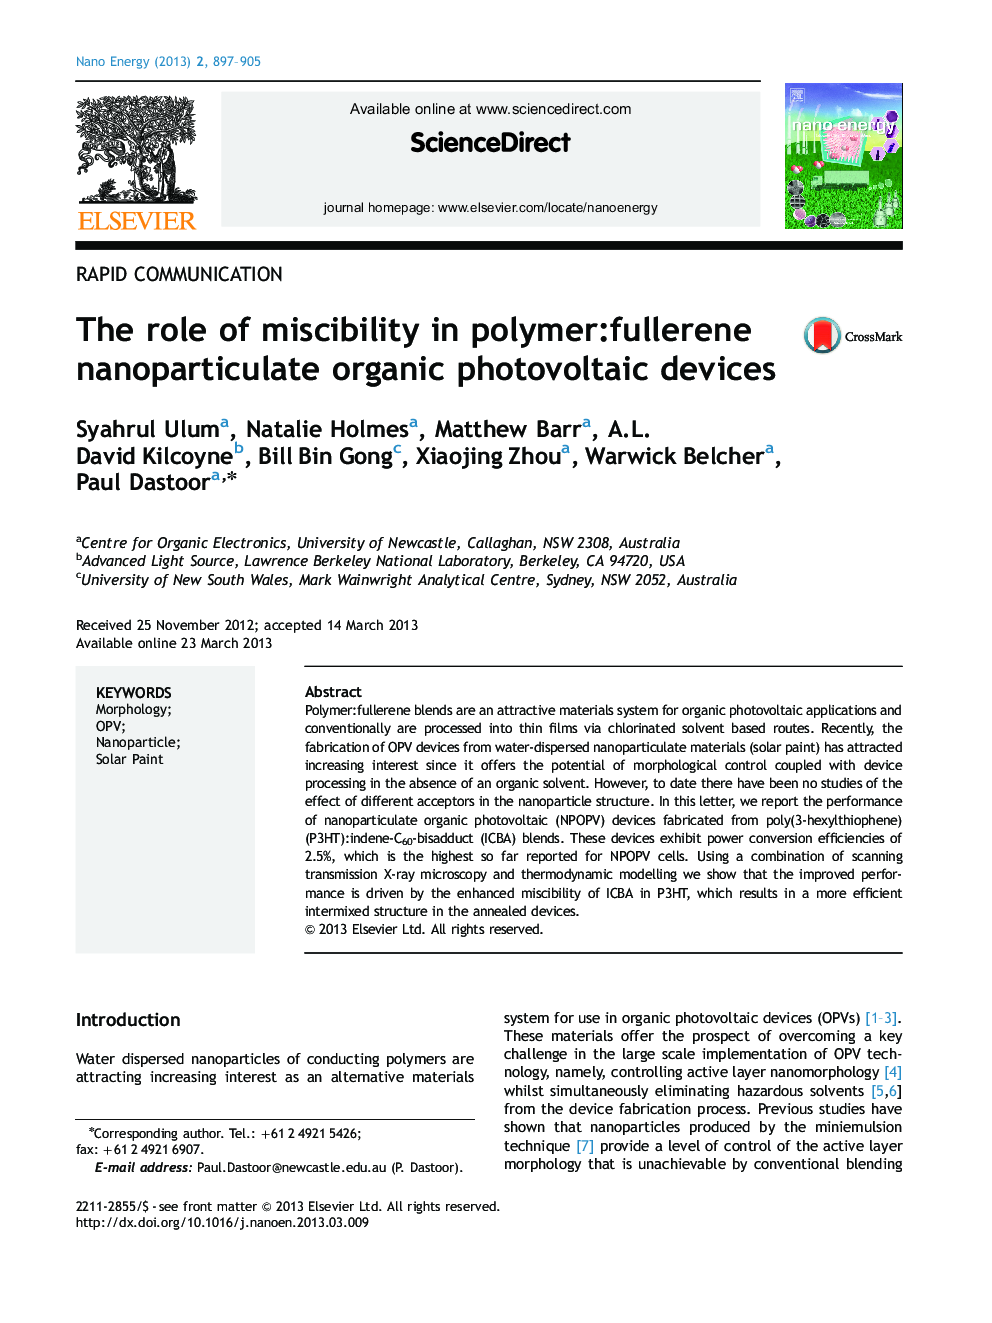 The role of miscibility in polymer:fullerene nanoparticulate organic photovoltaic devices